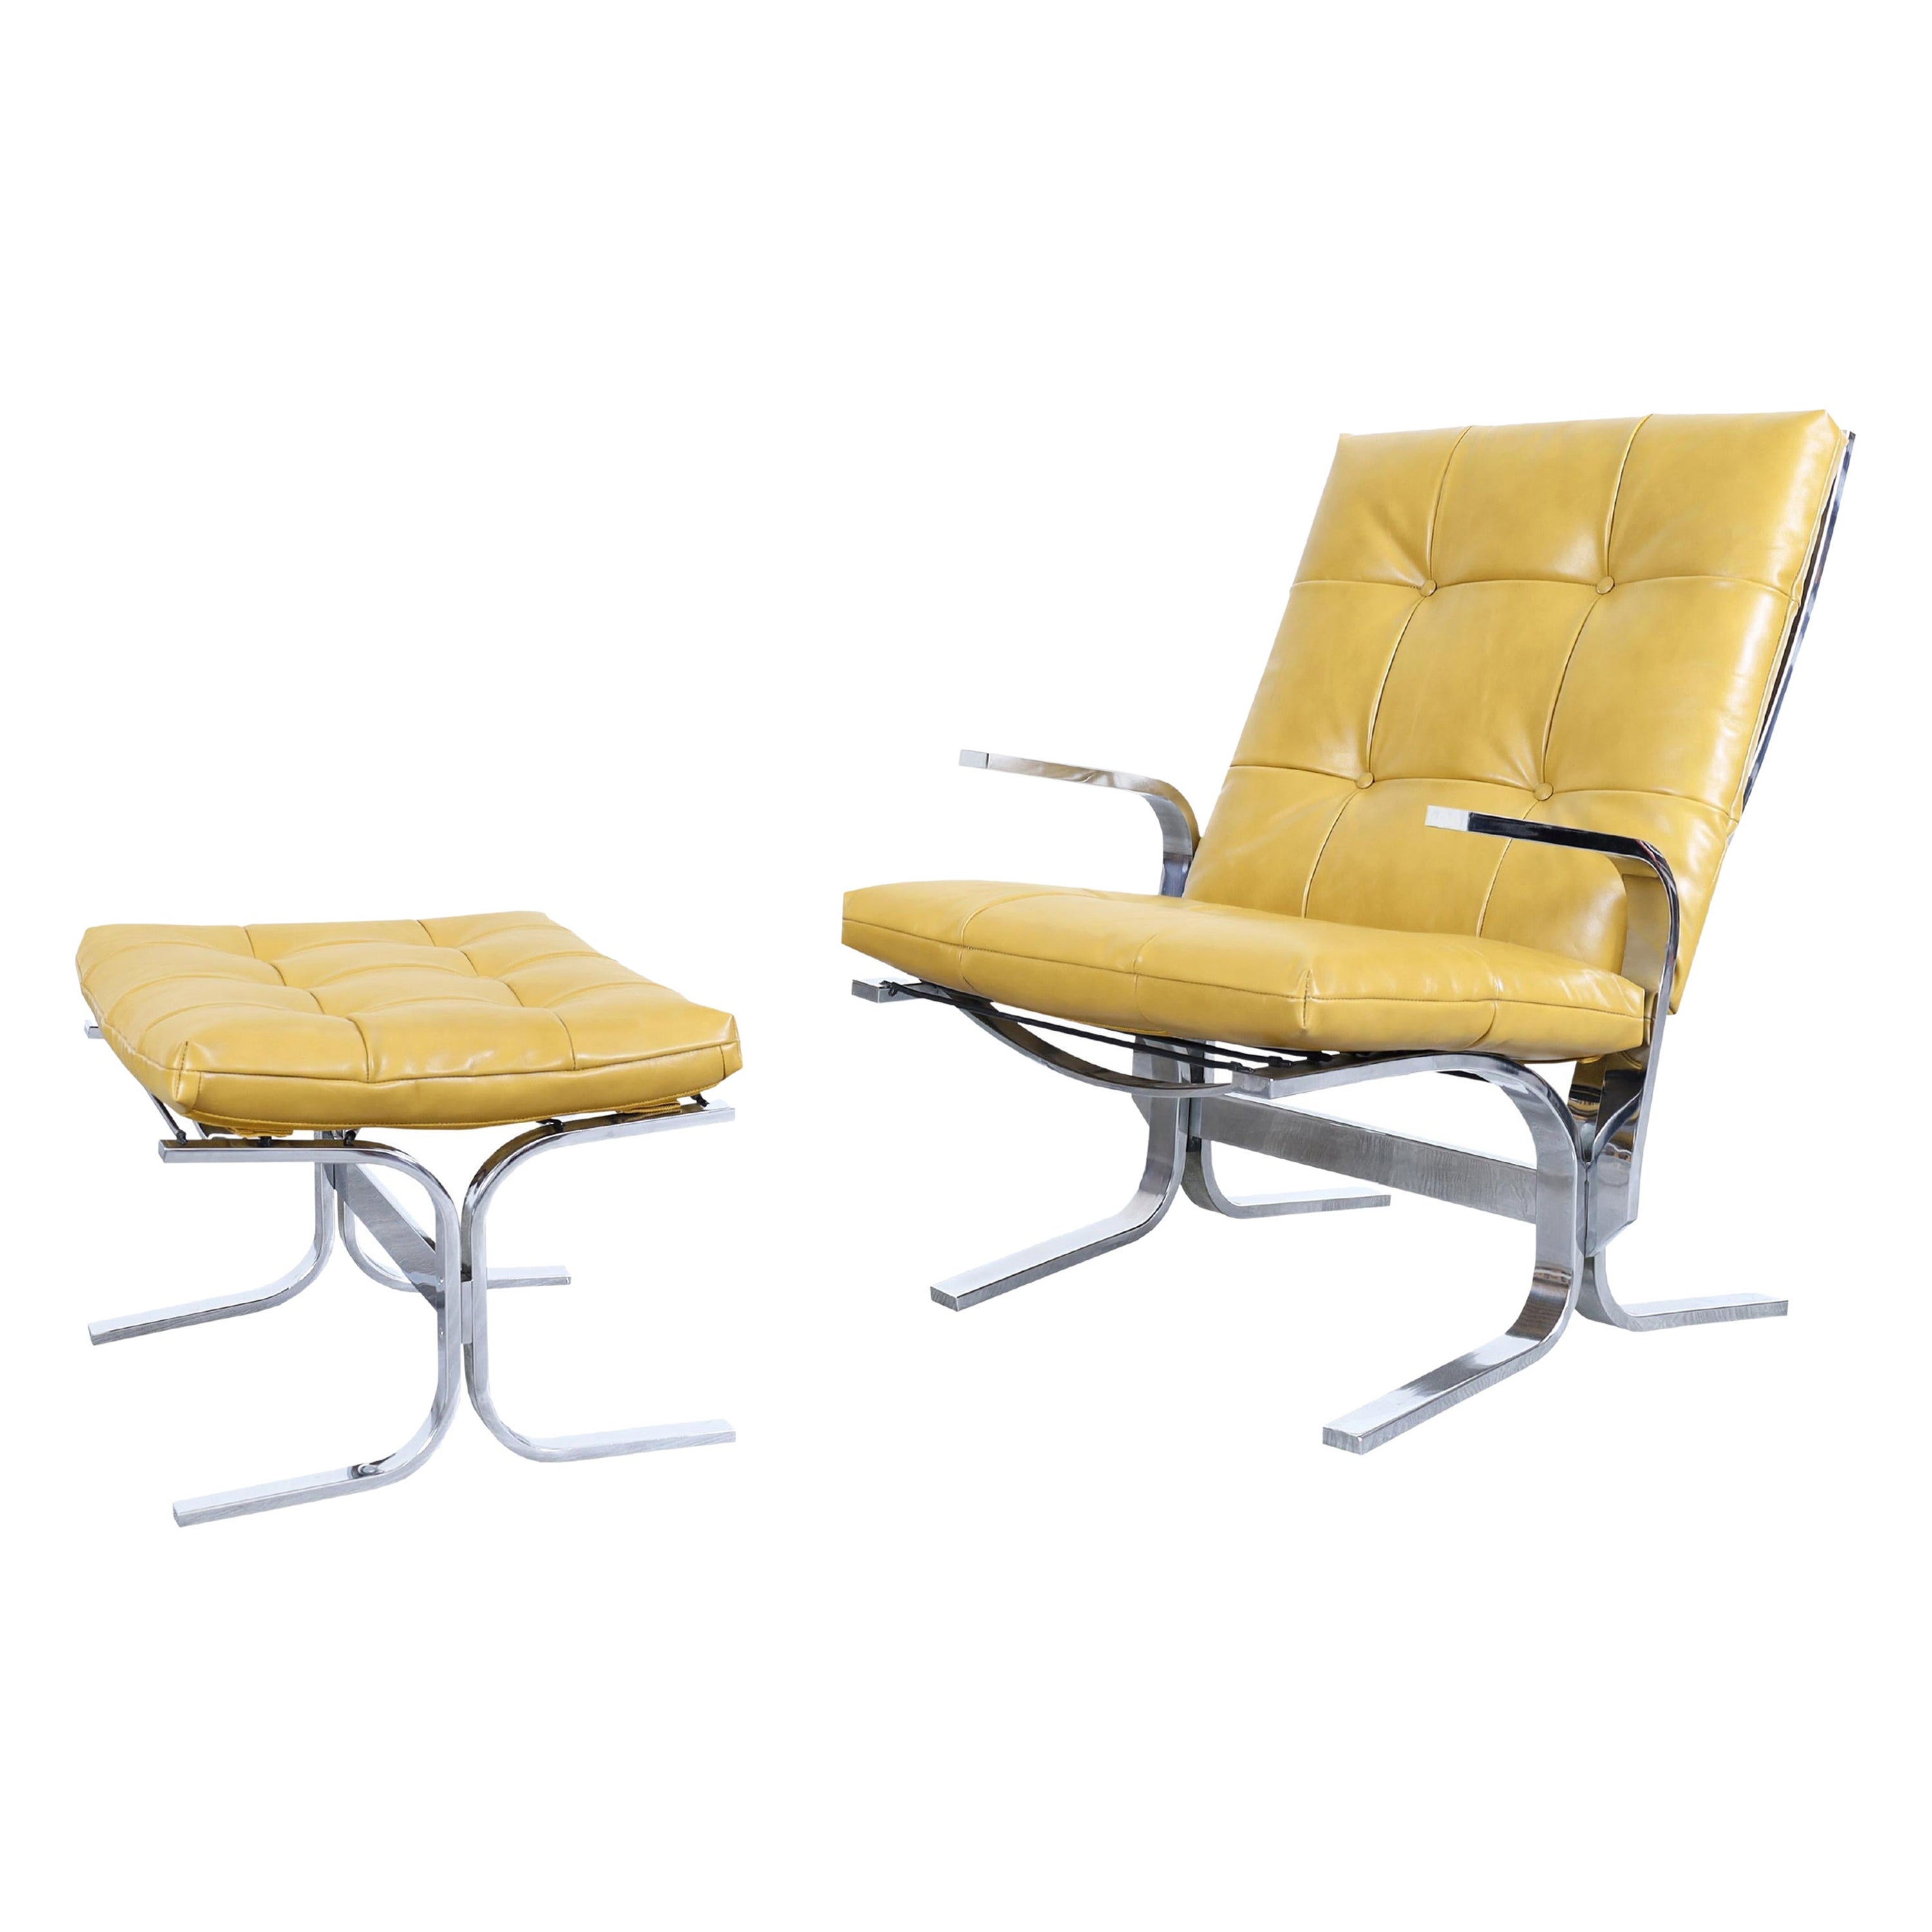 Midcentury Chrome and Leather Lounge Chair and Ottoman